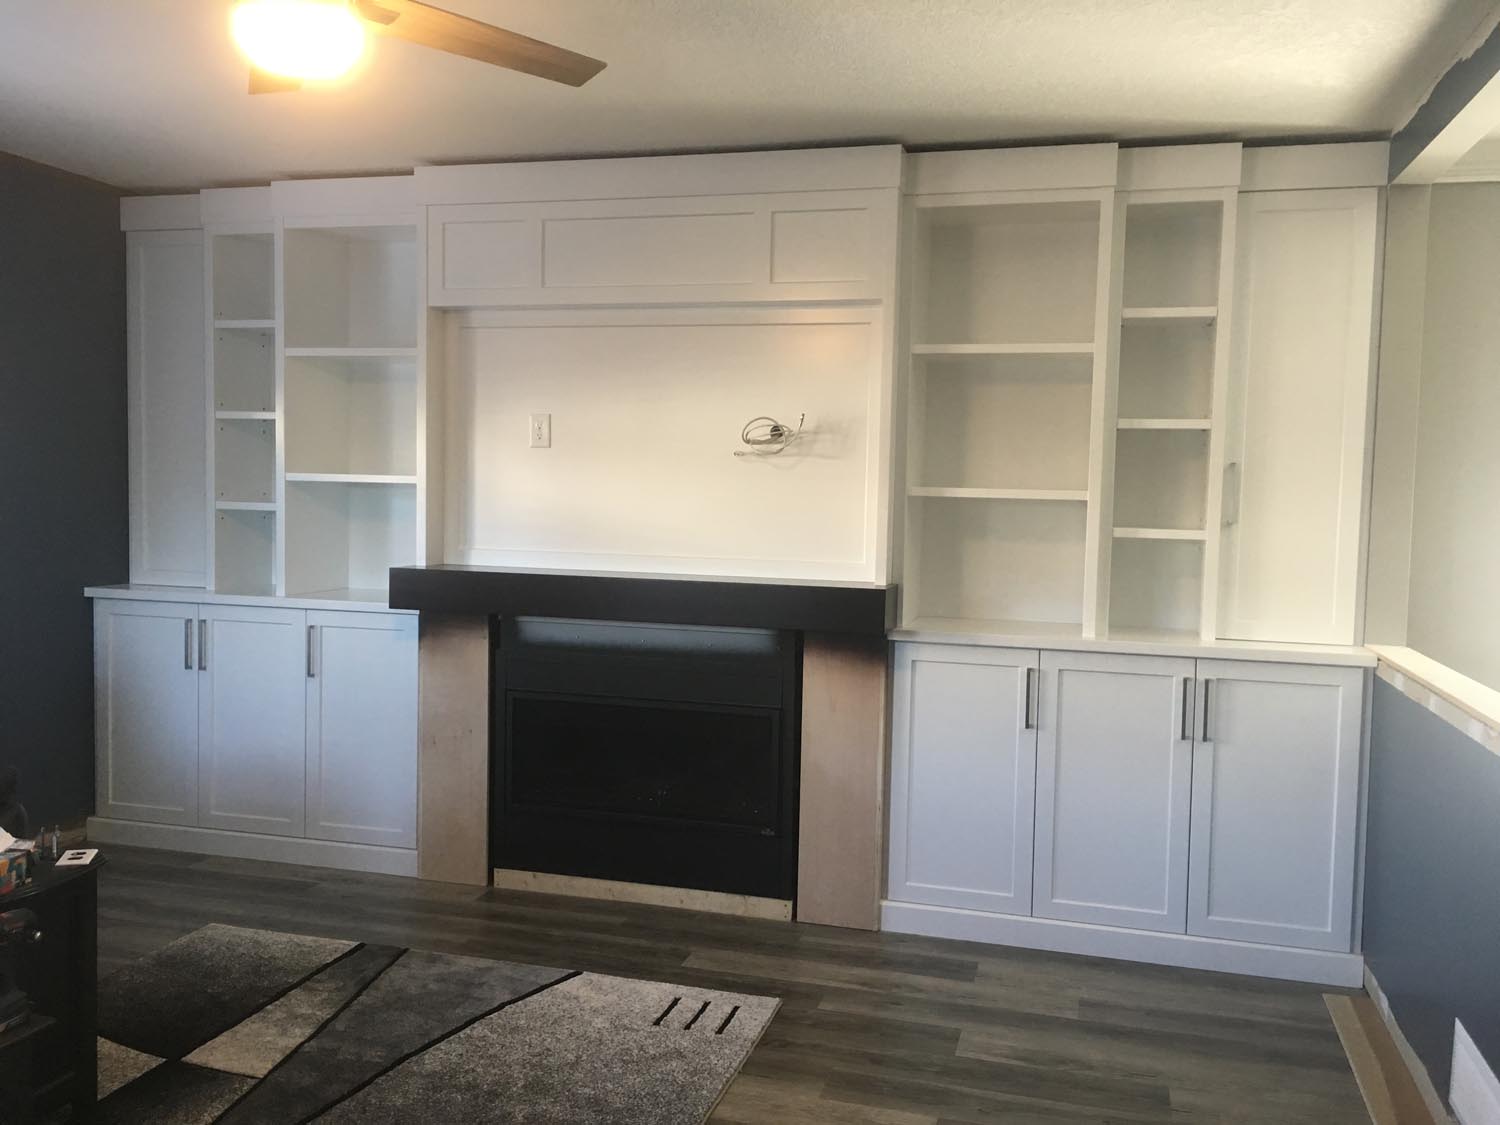 Built in cabinets around fireplace